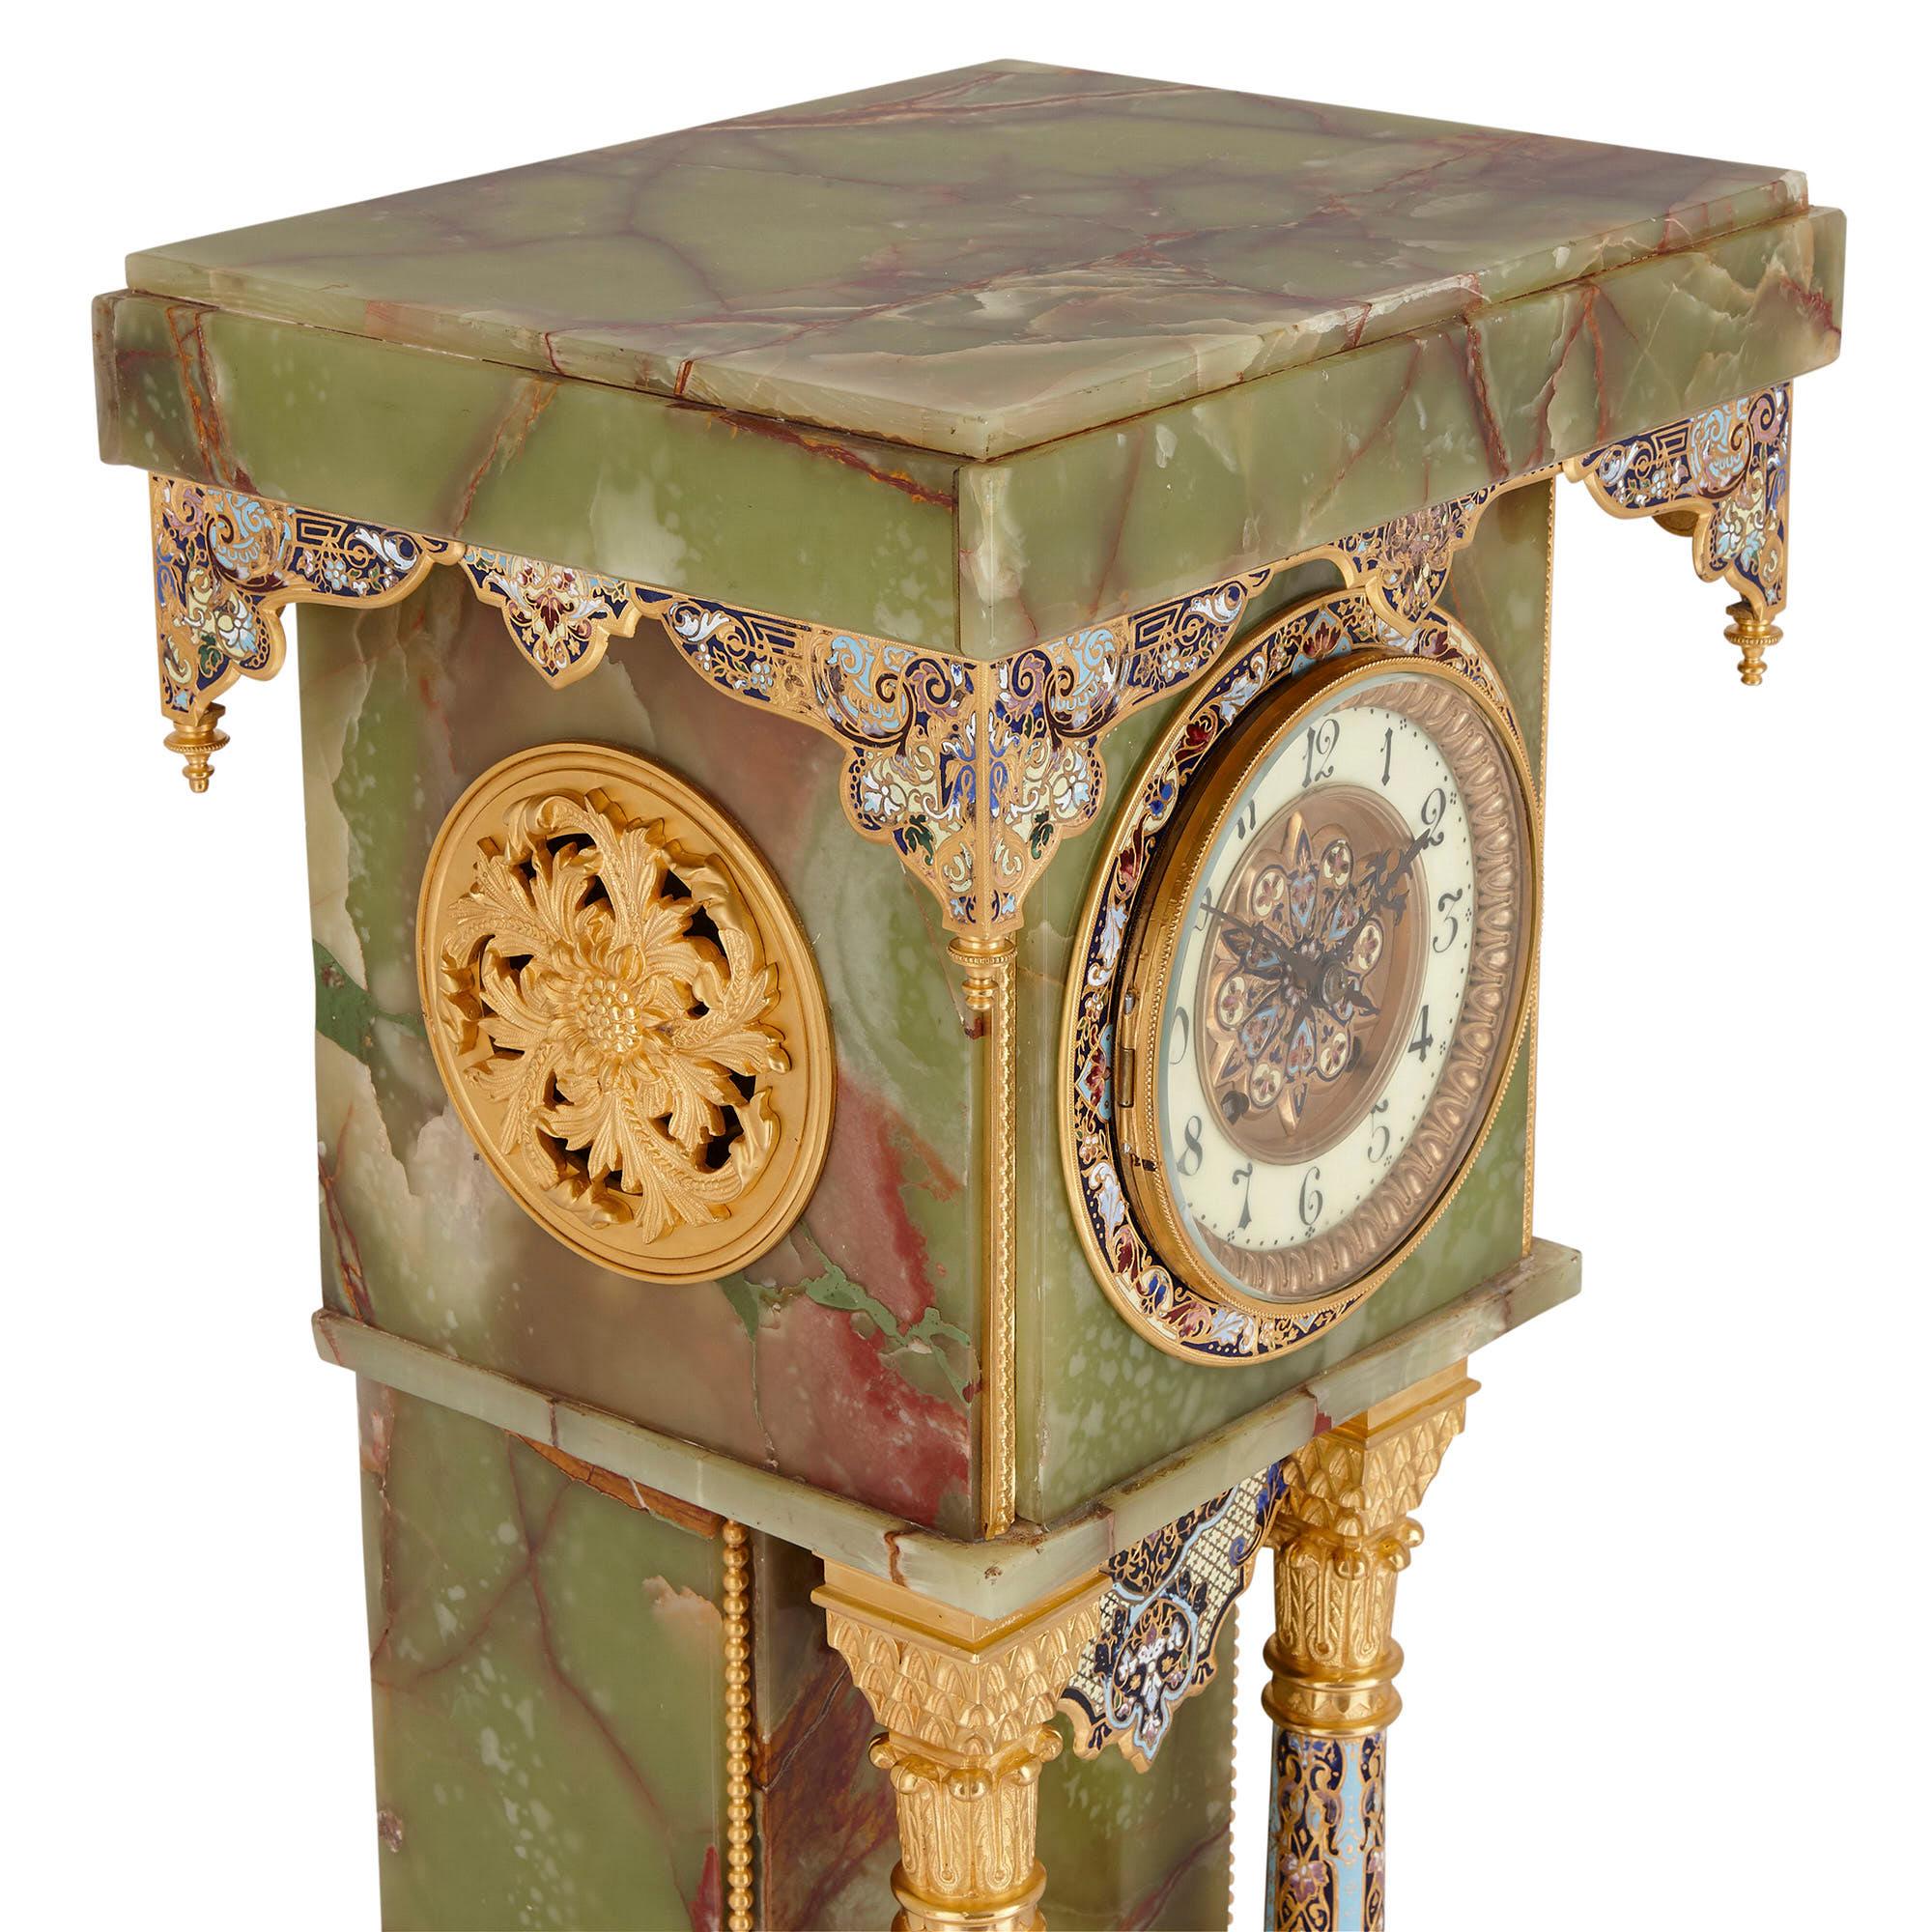 French Neoclassical Style Enamel, Onyx, and Gilt Bronze Pedestal Clock For Sale 1